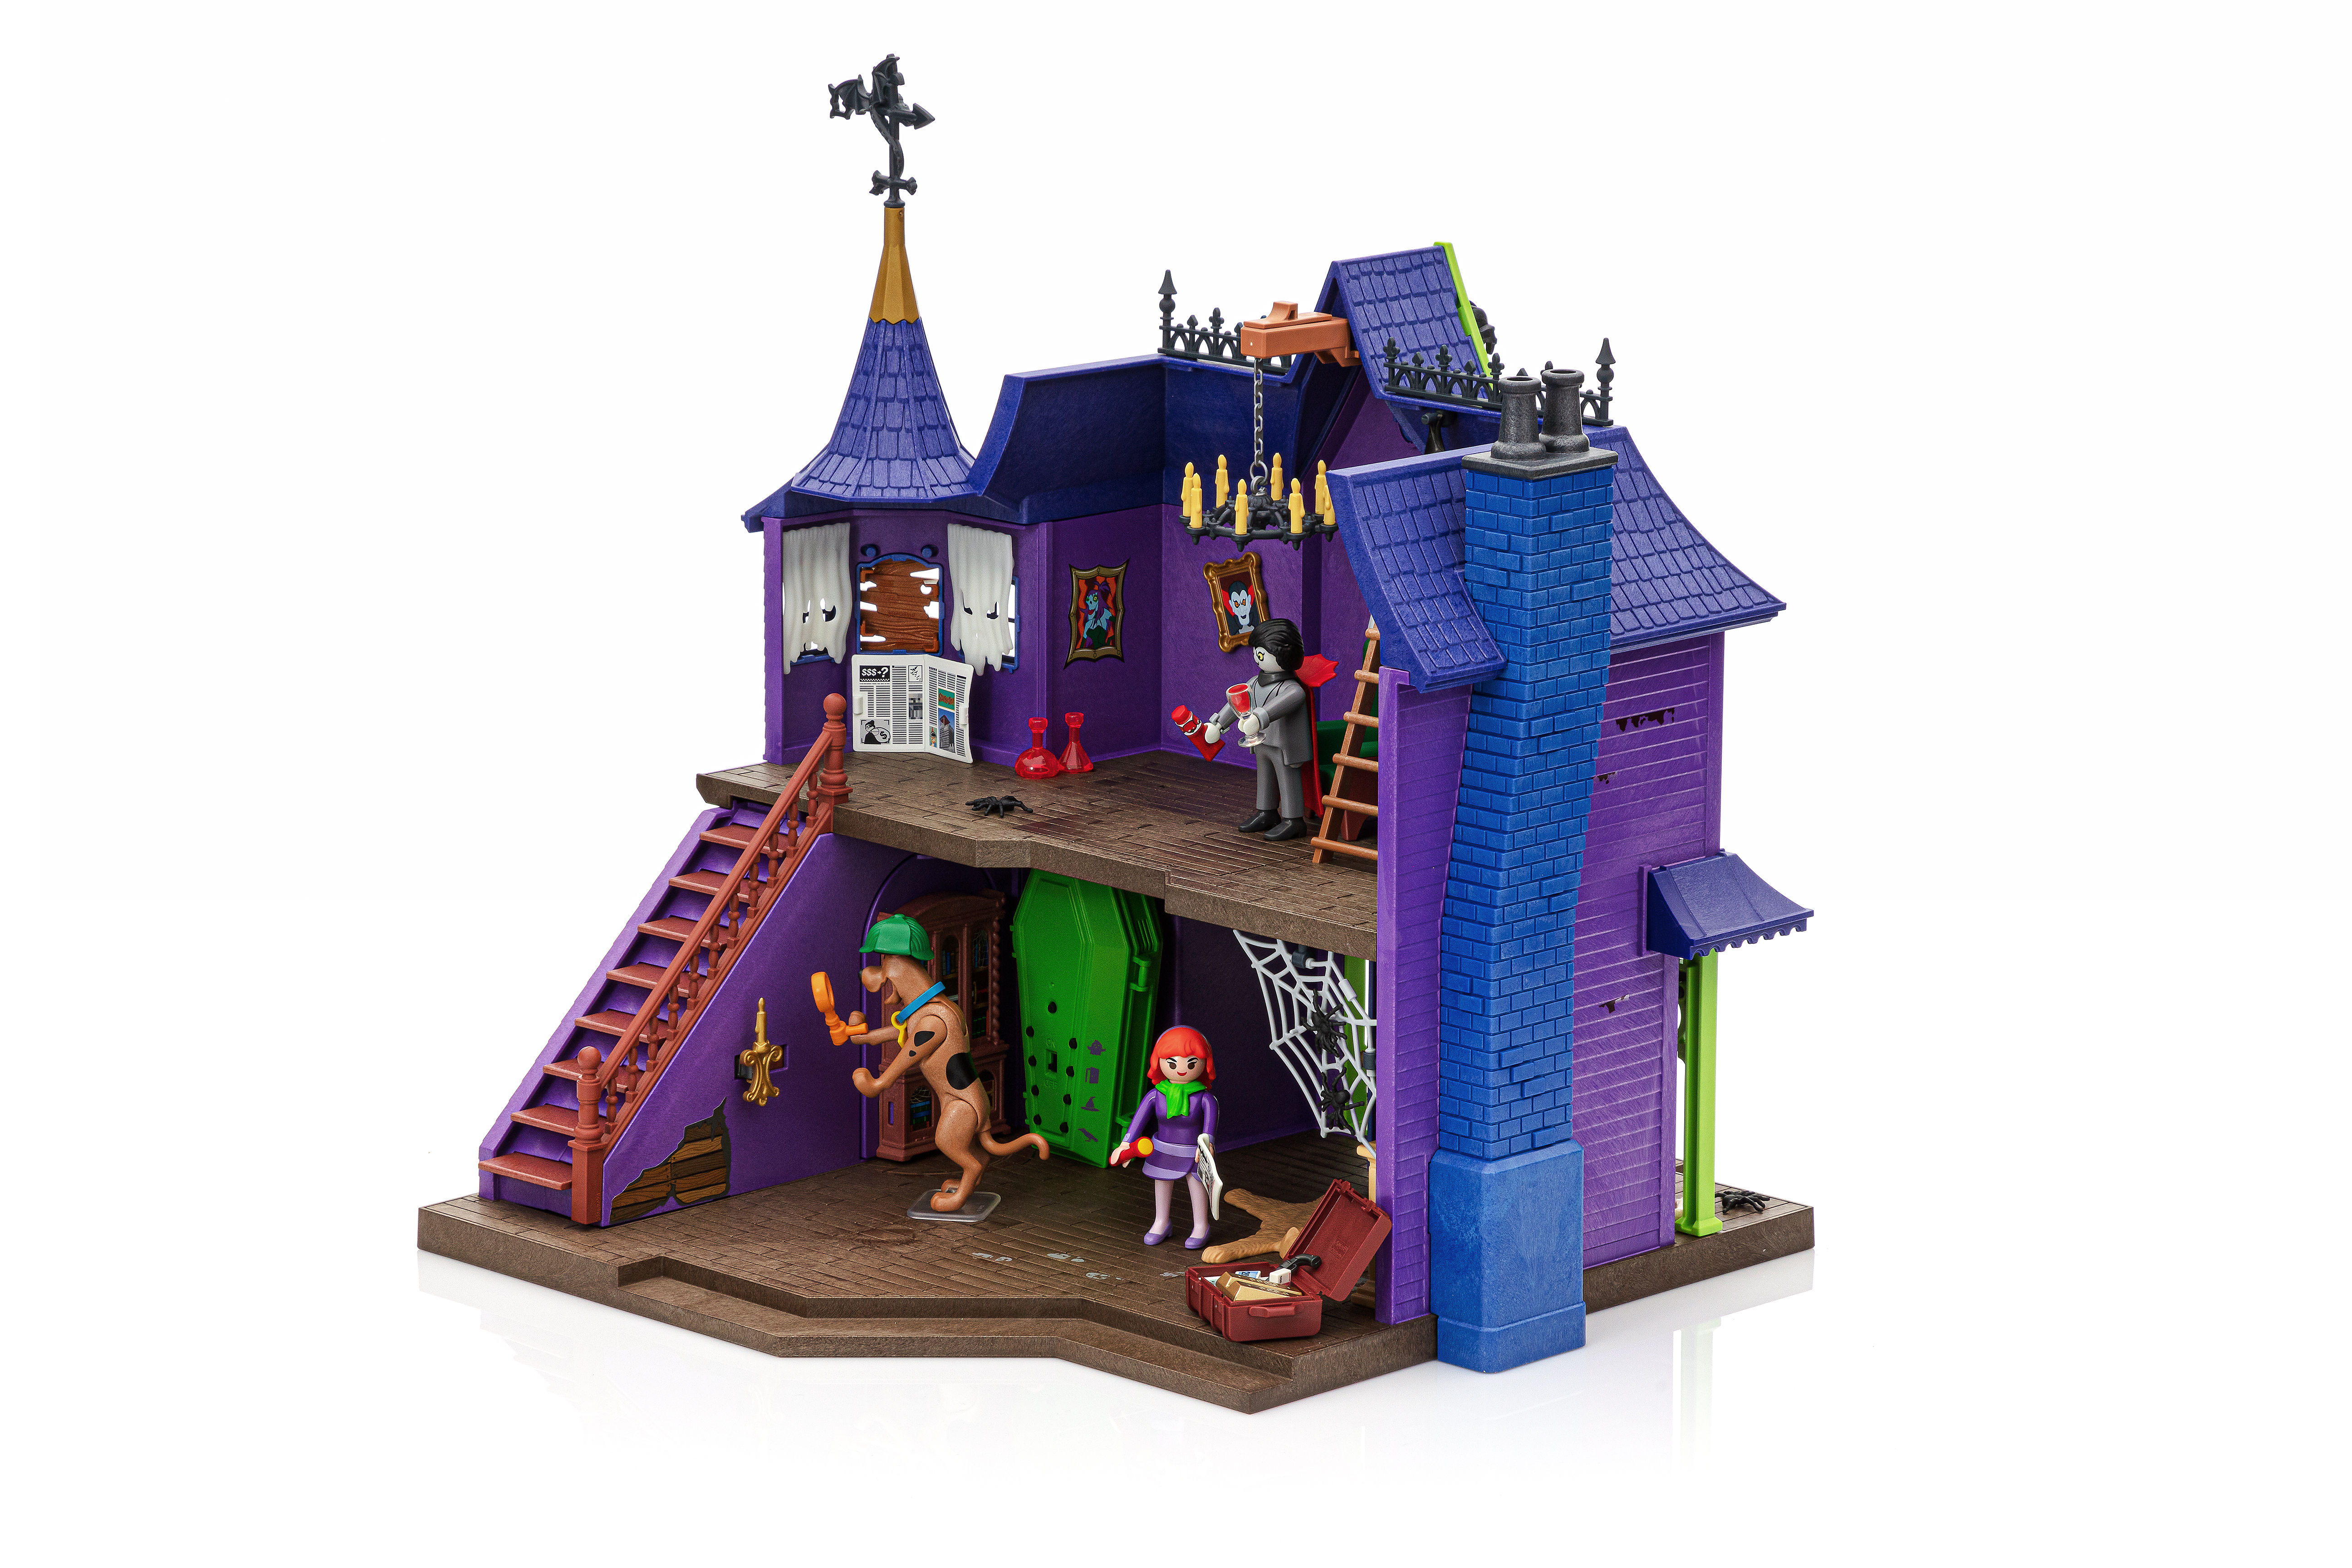 Playmobil 70361 Scooby-Doo! Adventure in the Mystery Mansion